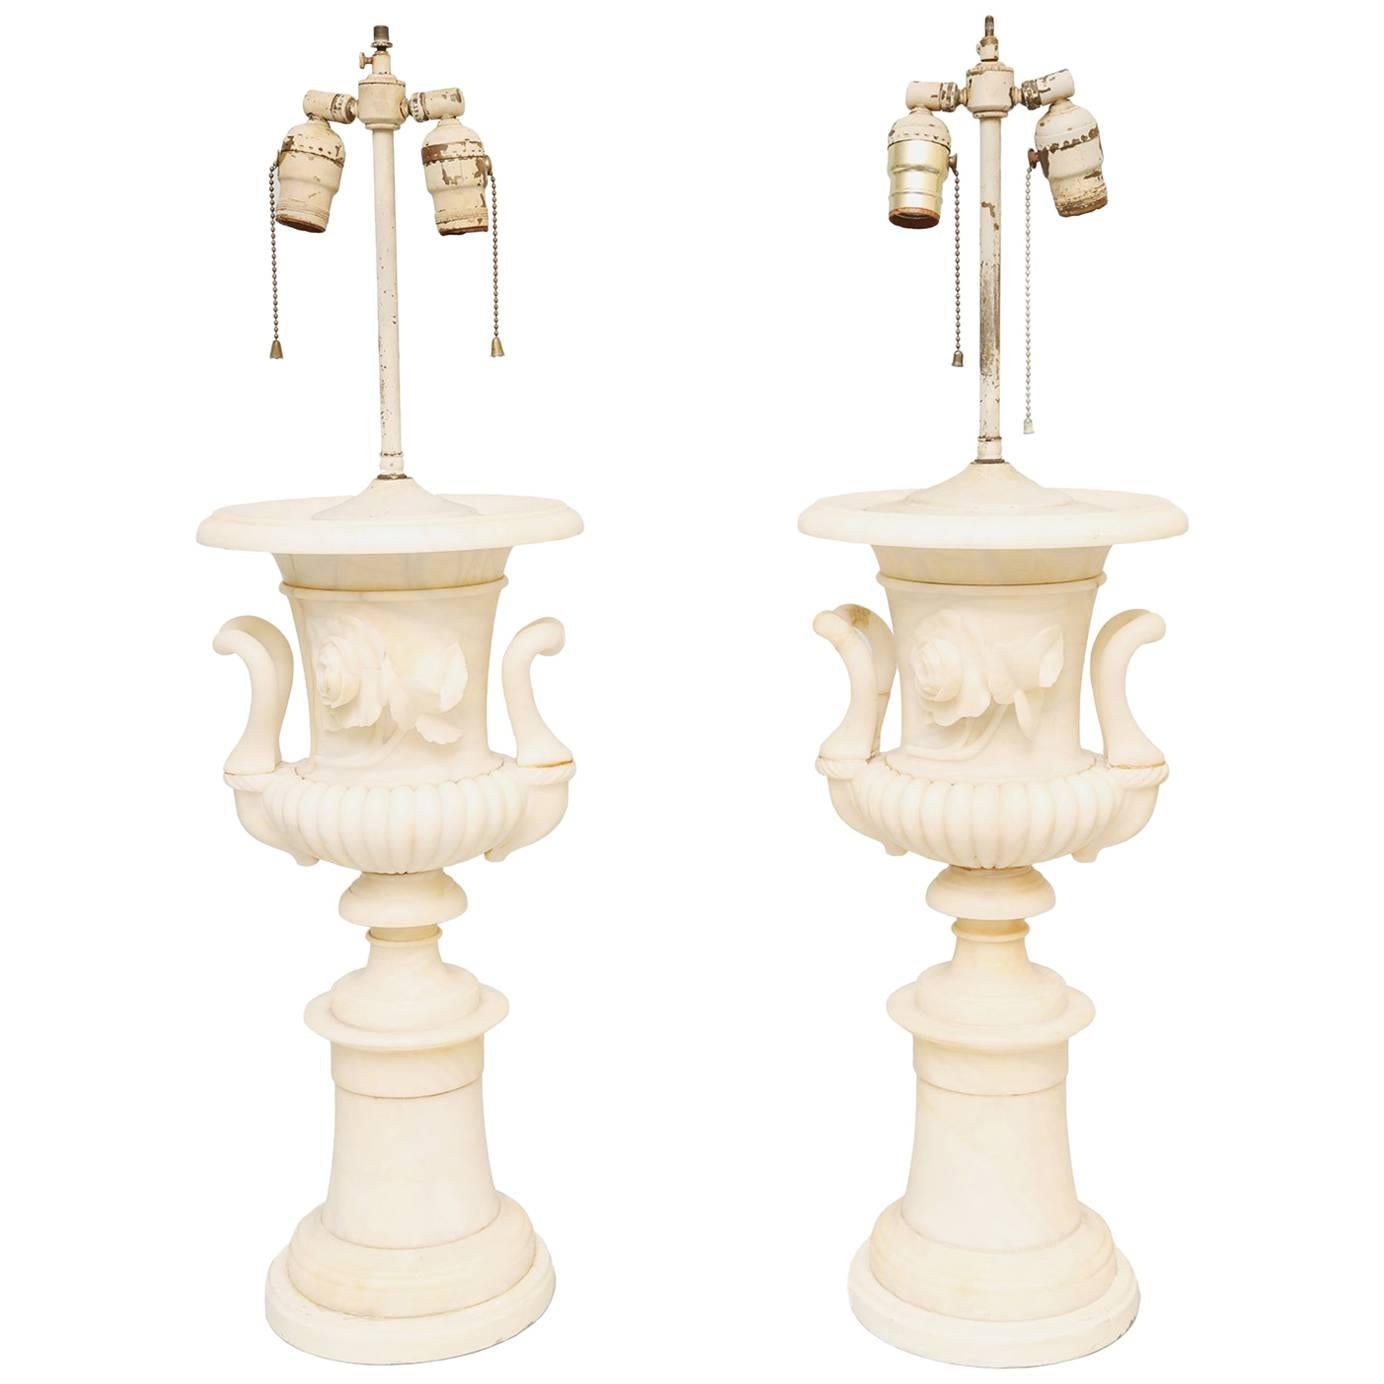 Pair of Grand Scale Urn-Form Alabaster Lamps